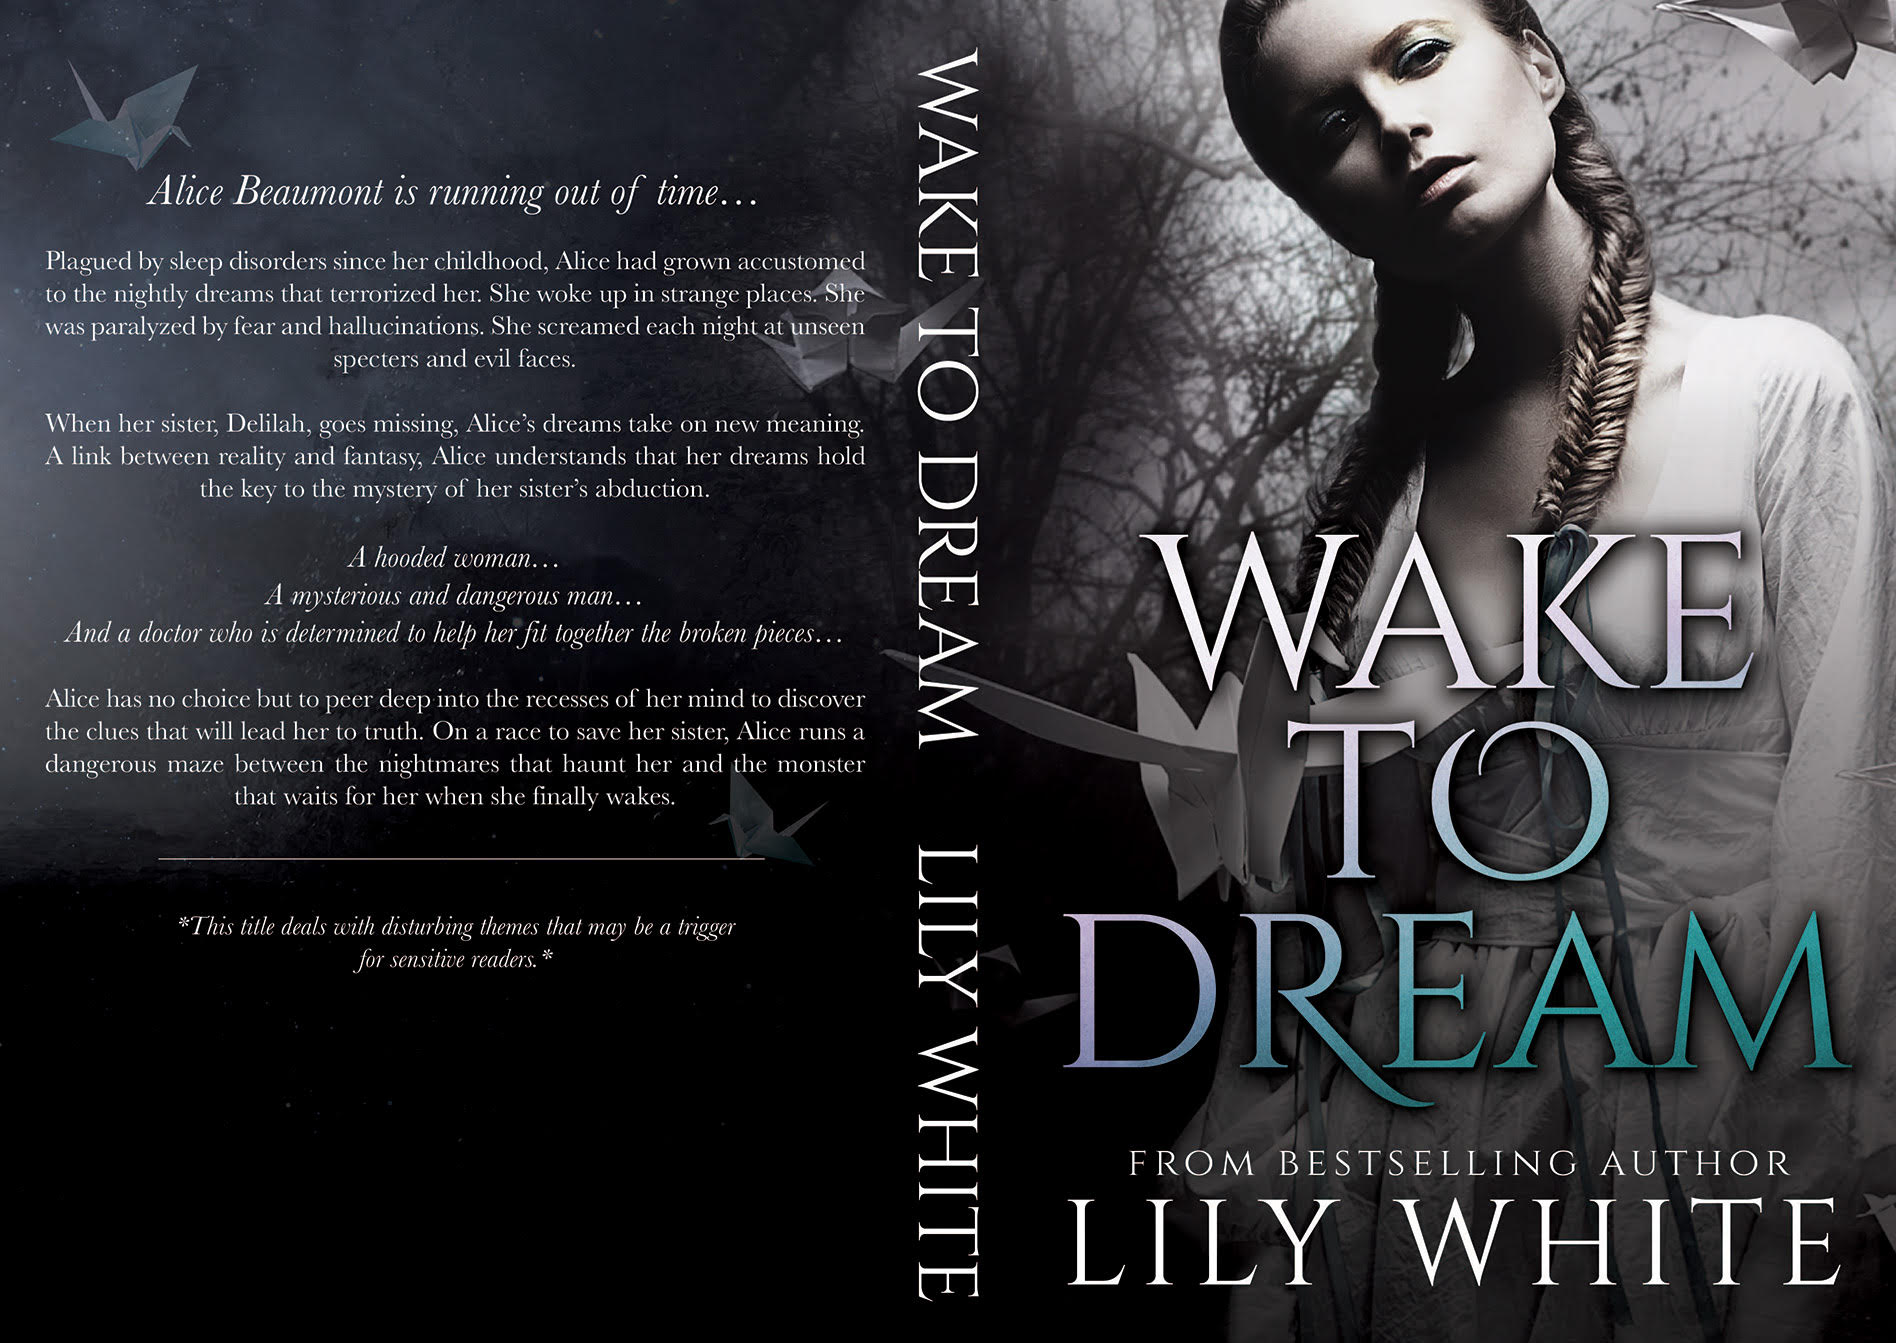 Wake To Dream by Lily White #CoverReveal @lilywhitebooks